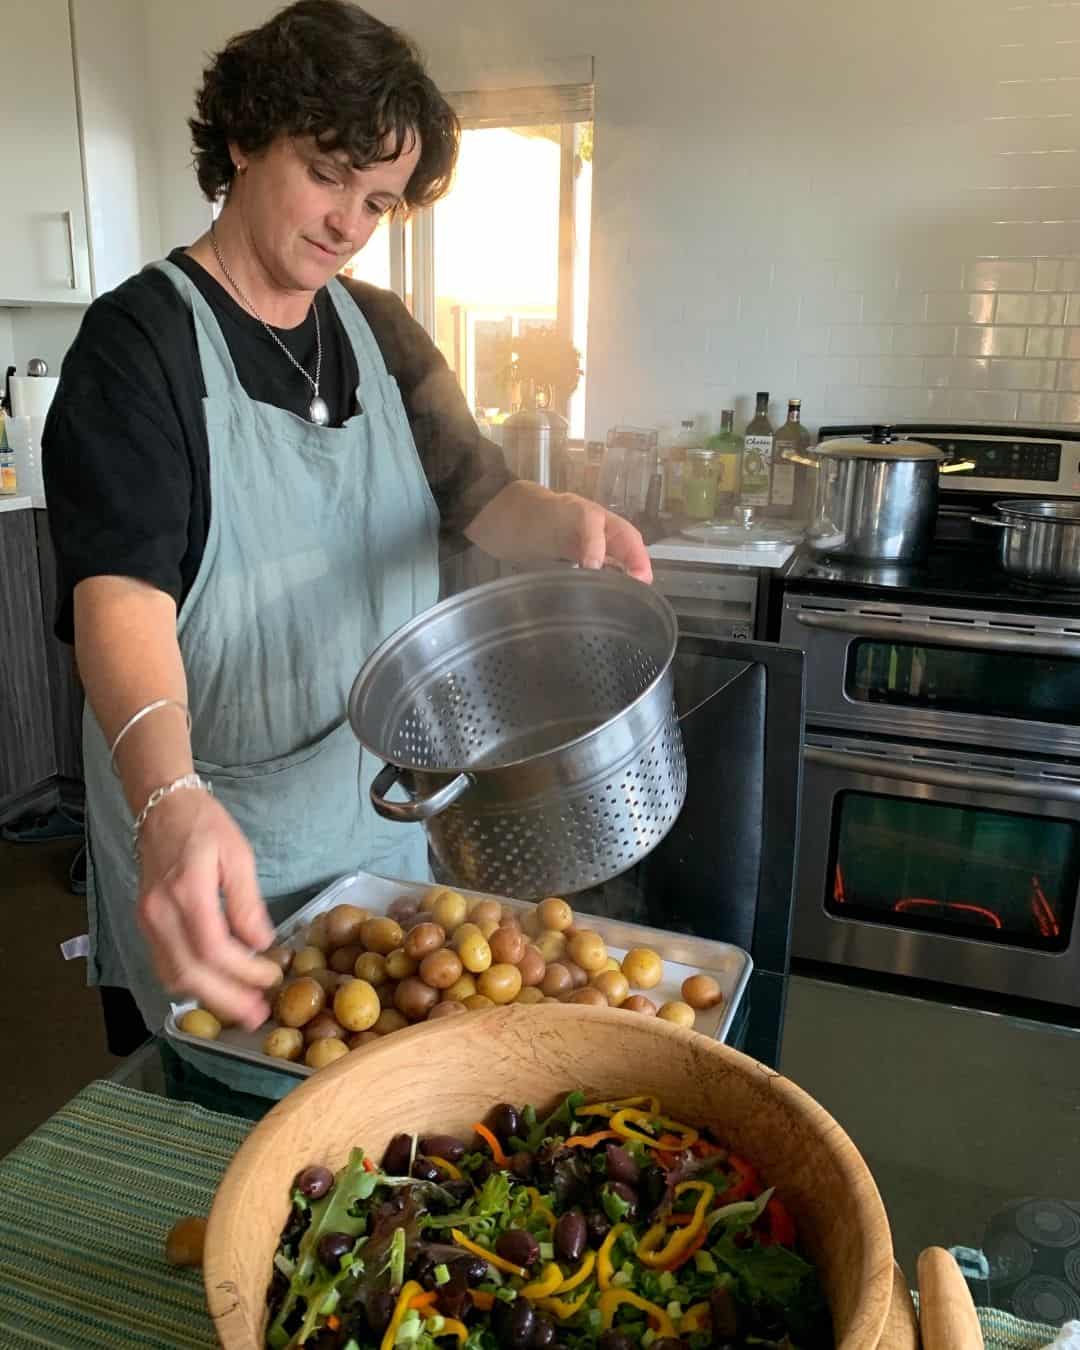 A woman prepares potatoes and salad fresh from the garden